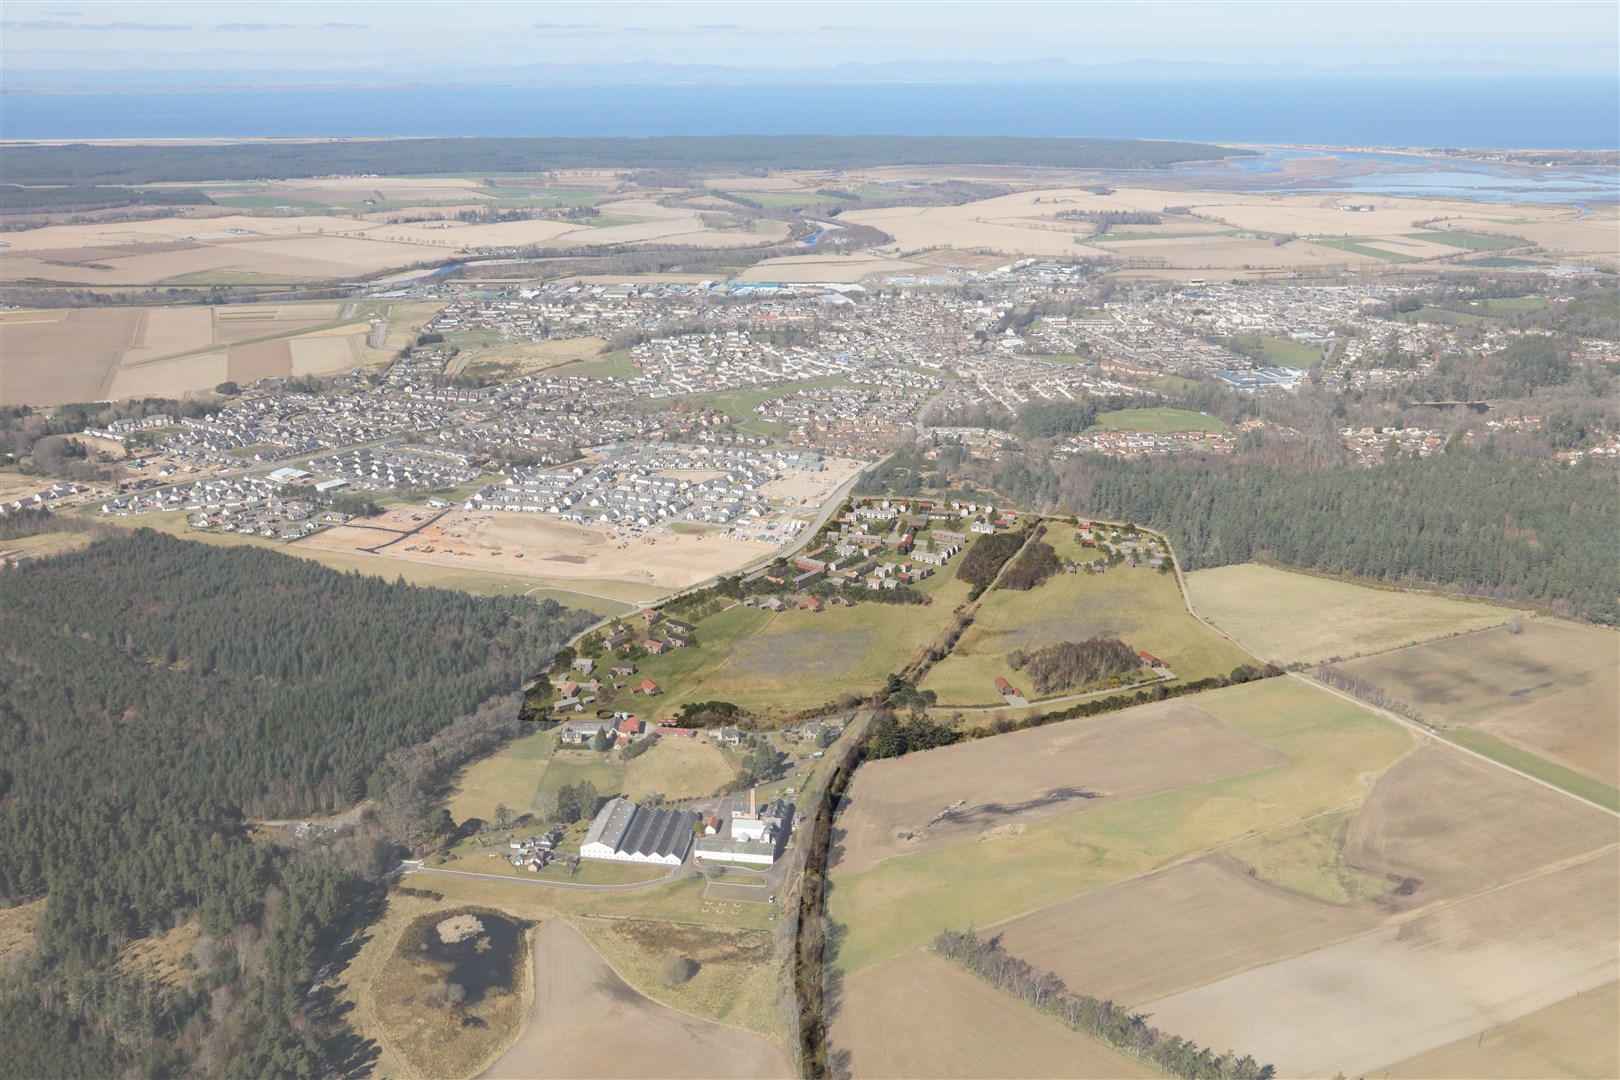 Dallas Dhu with Forres and the Moray Firth in the background. Image courtesy of Fraser/Livingstone Architects.